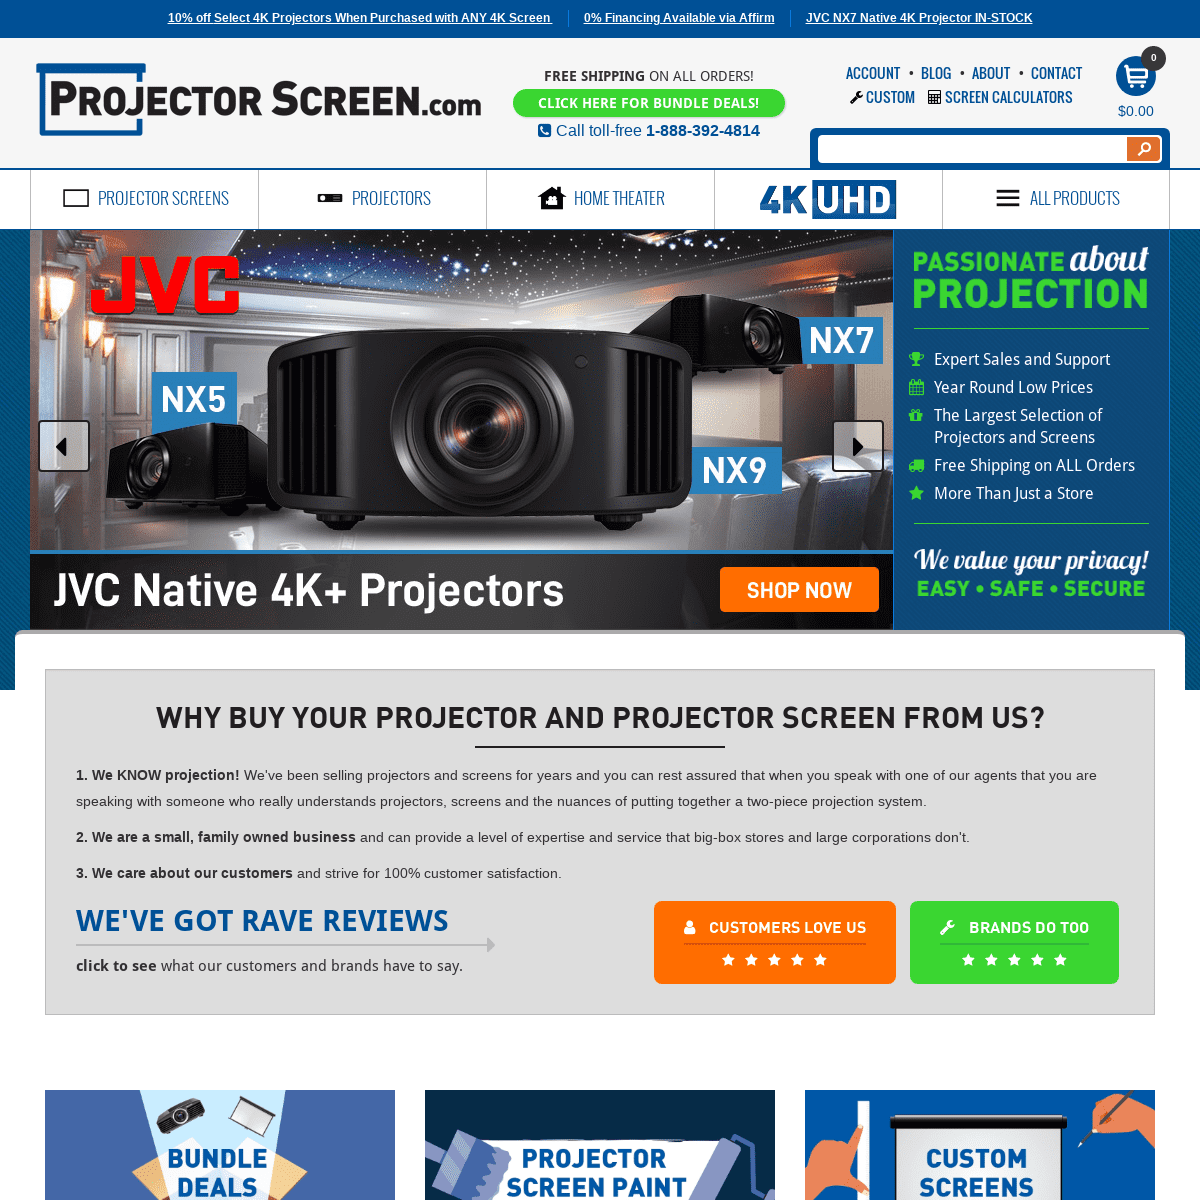 Projector Screen and Projector Sale - The Best Projector Screens